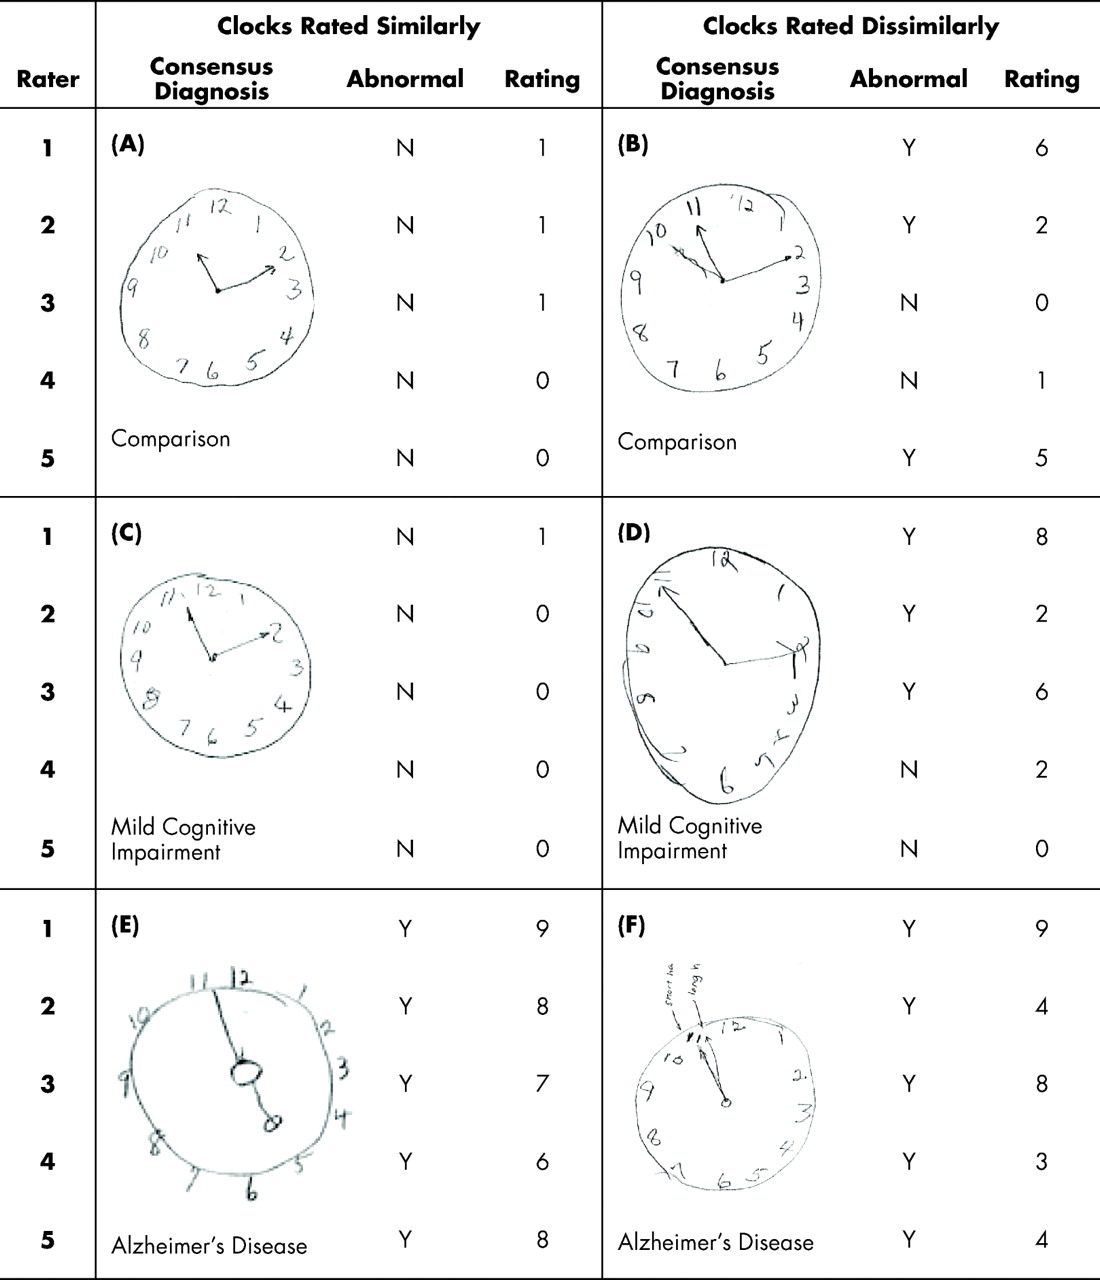 Clock Drawing Test Ratings by Dementia Specialists Interrater